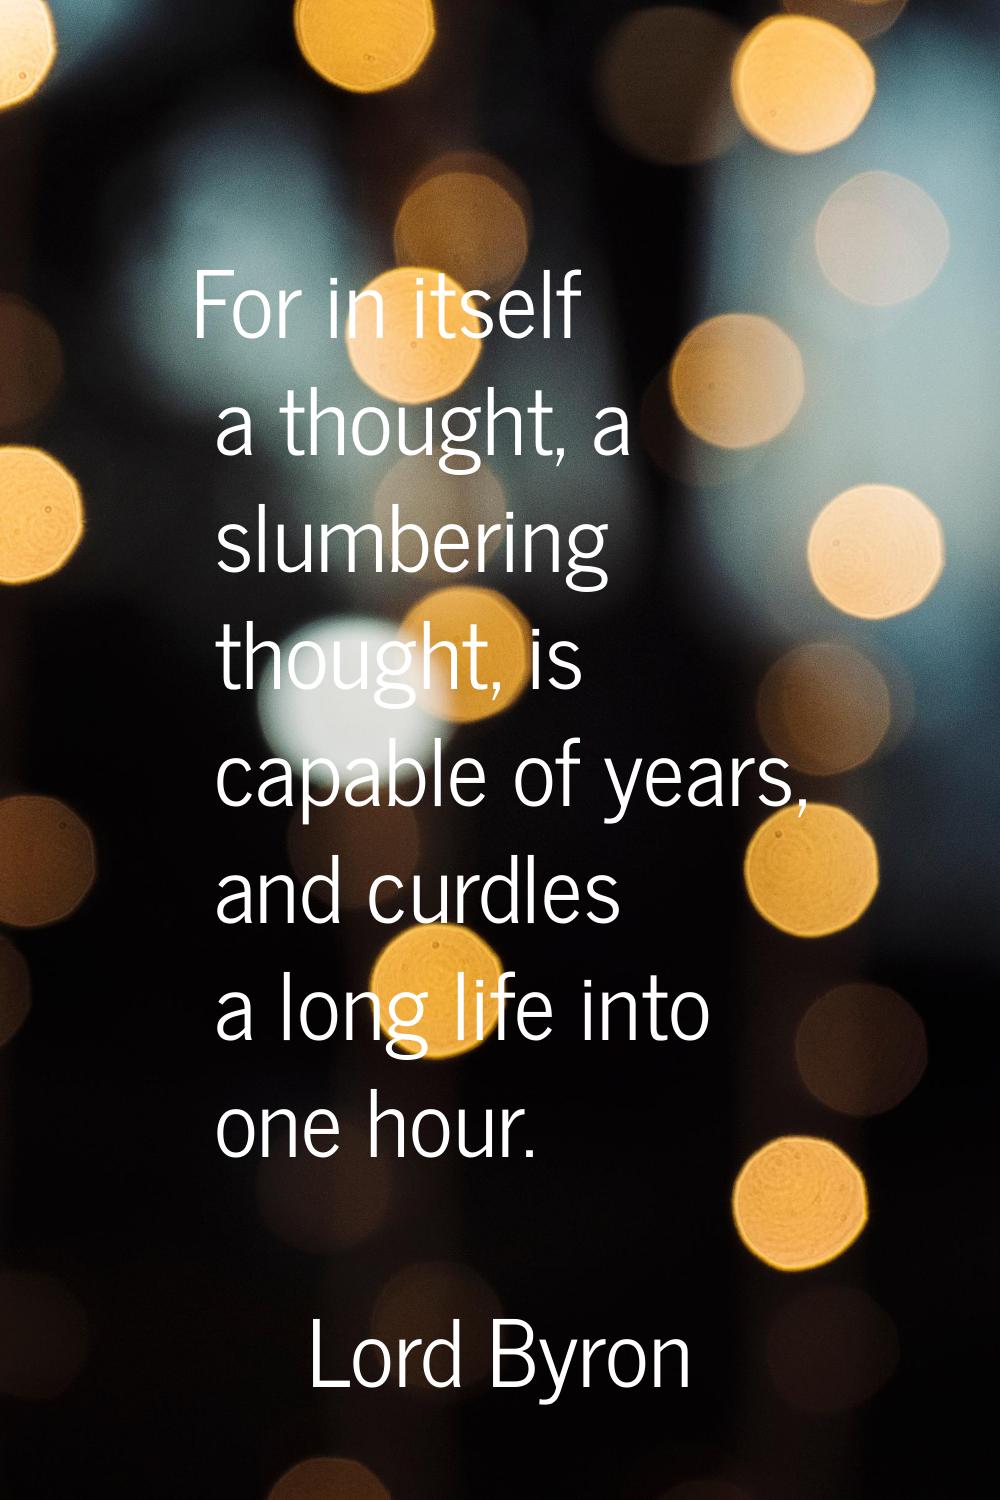 For in itself a thought, a slumbering thought, is capable of years, and curdles a long life into on